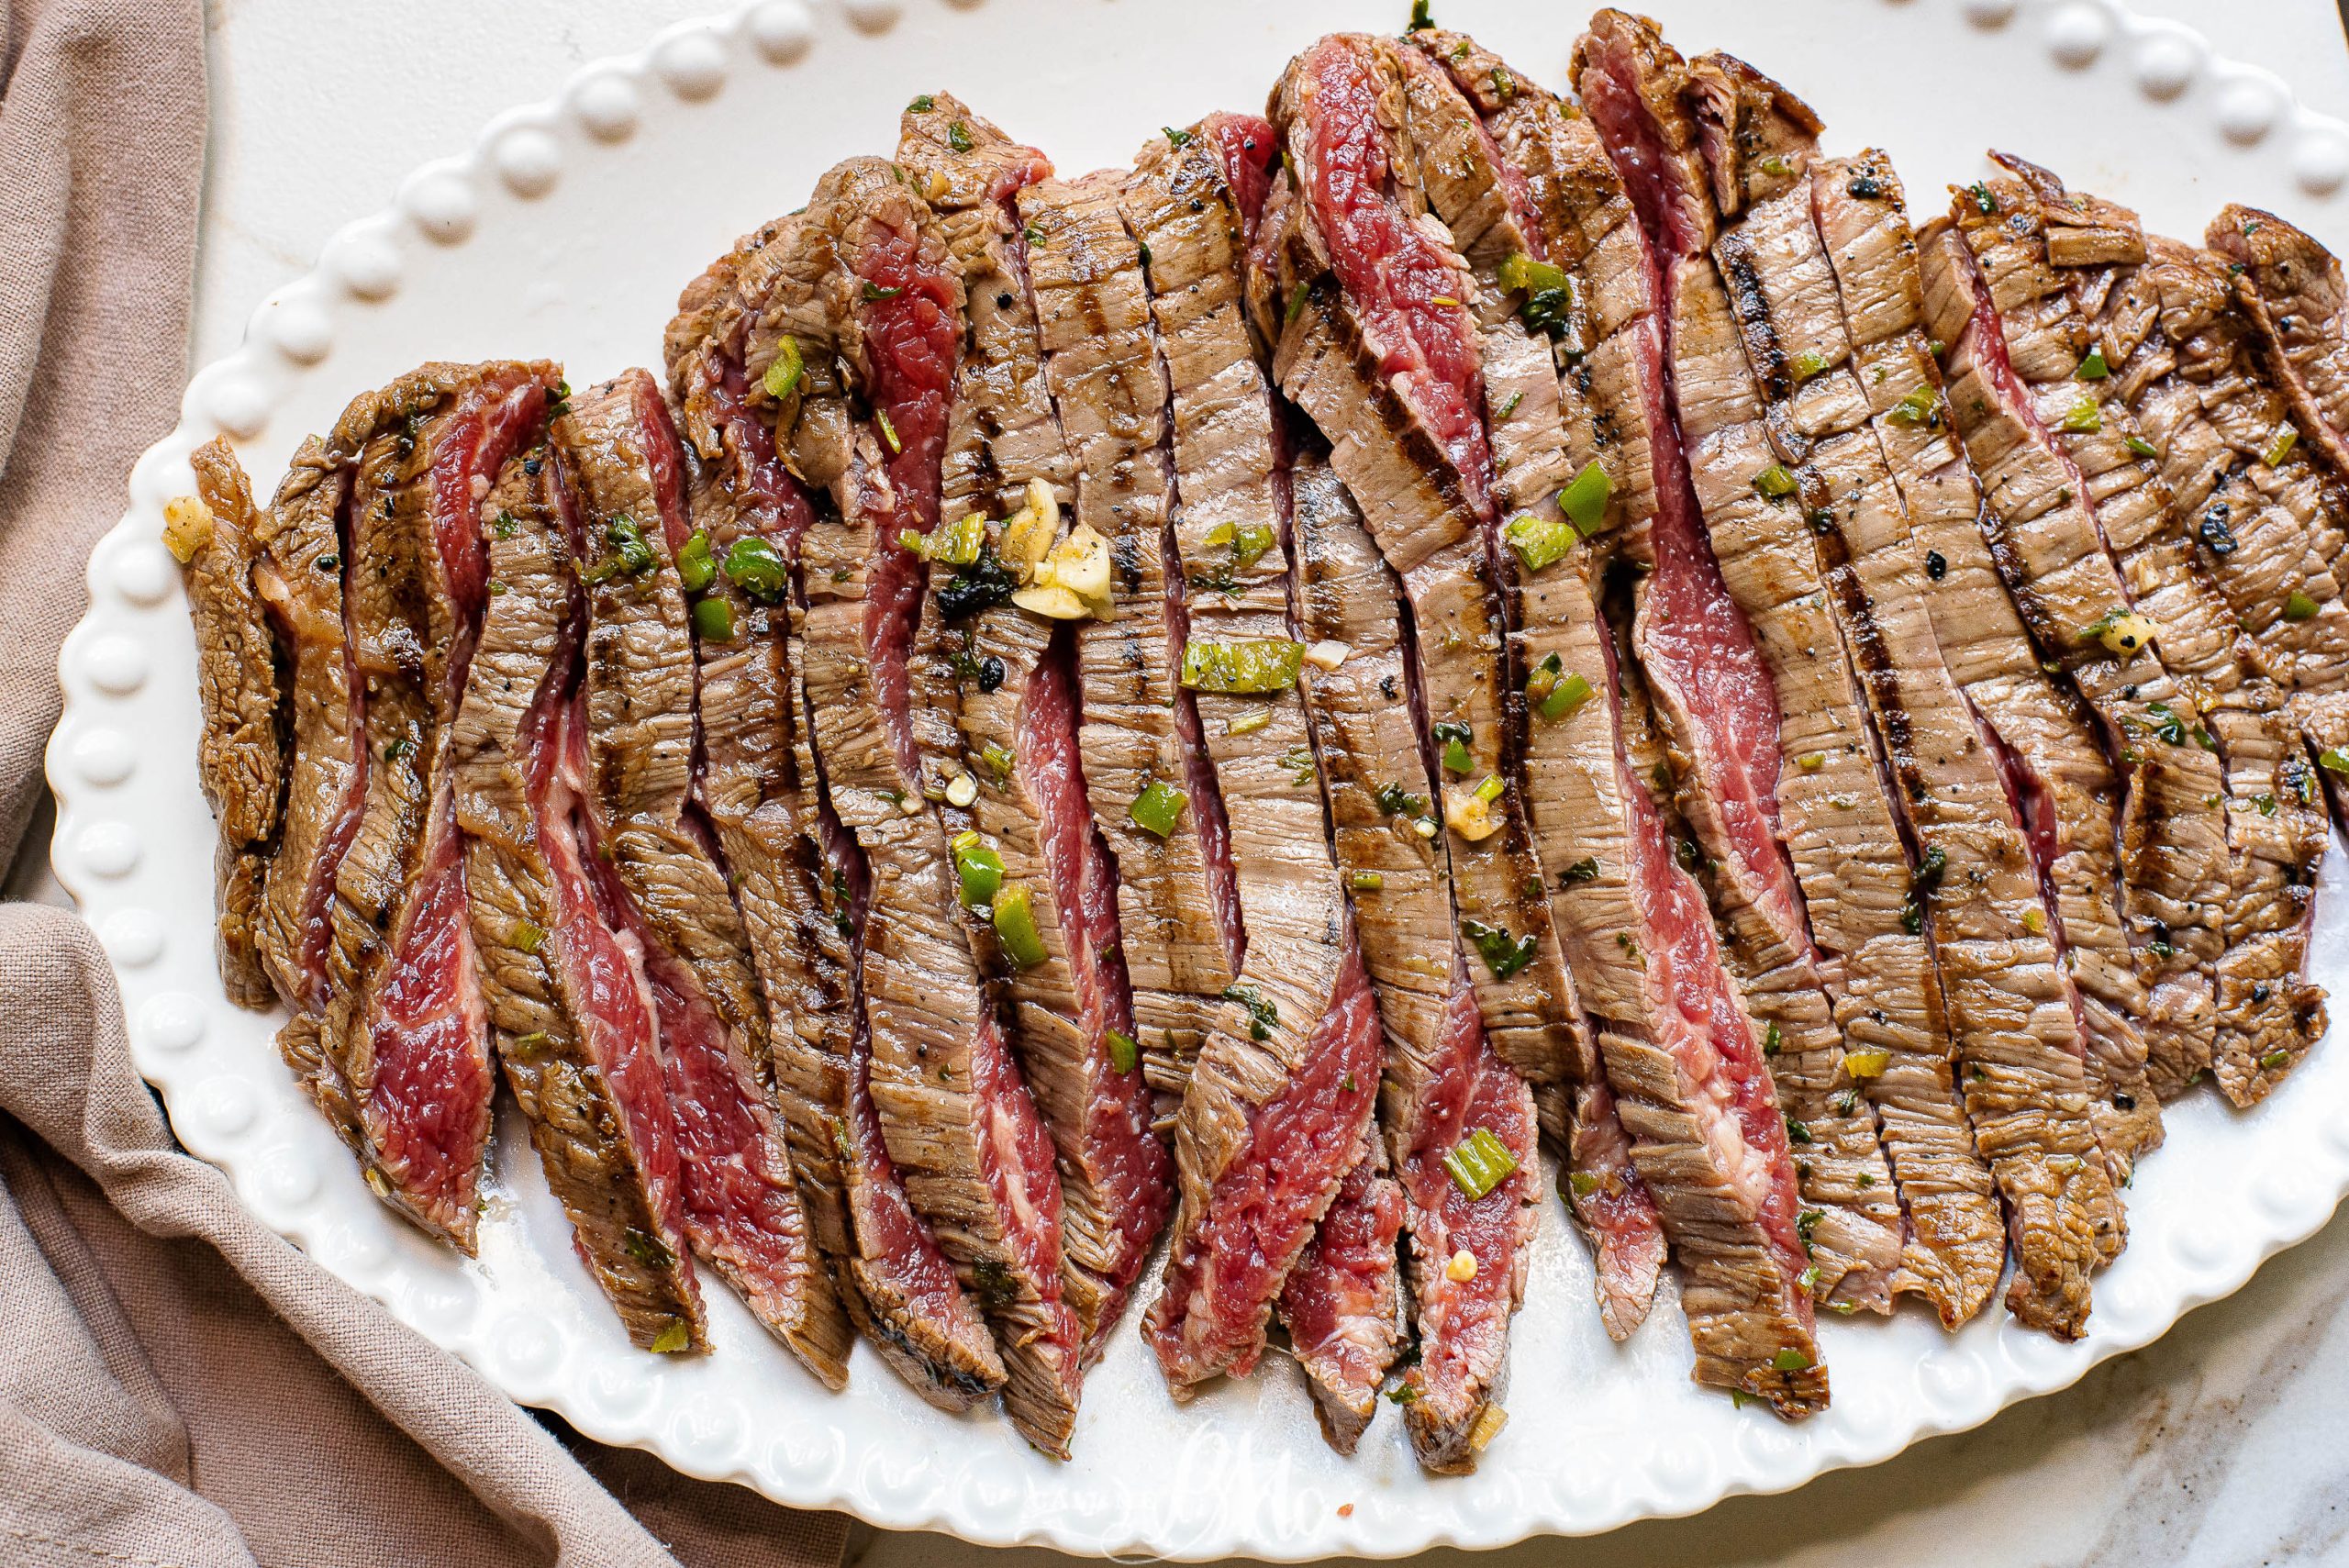 Marinated grilled meat, sliced and on a platter.